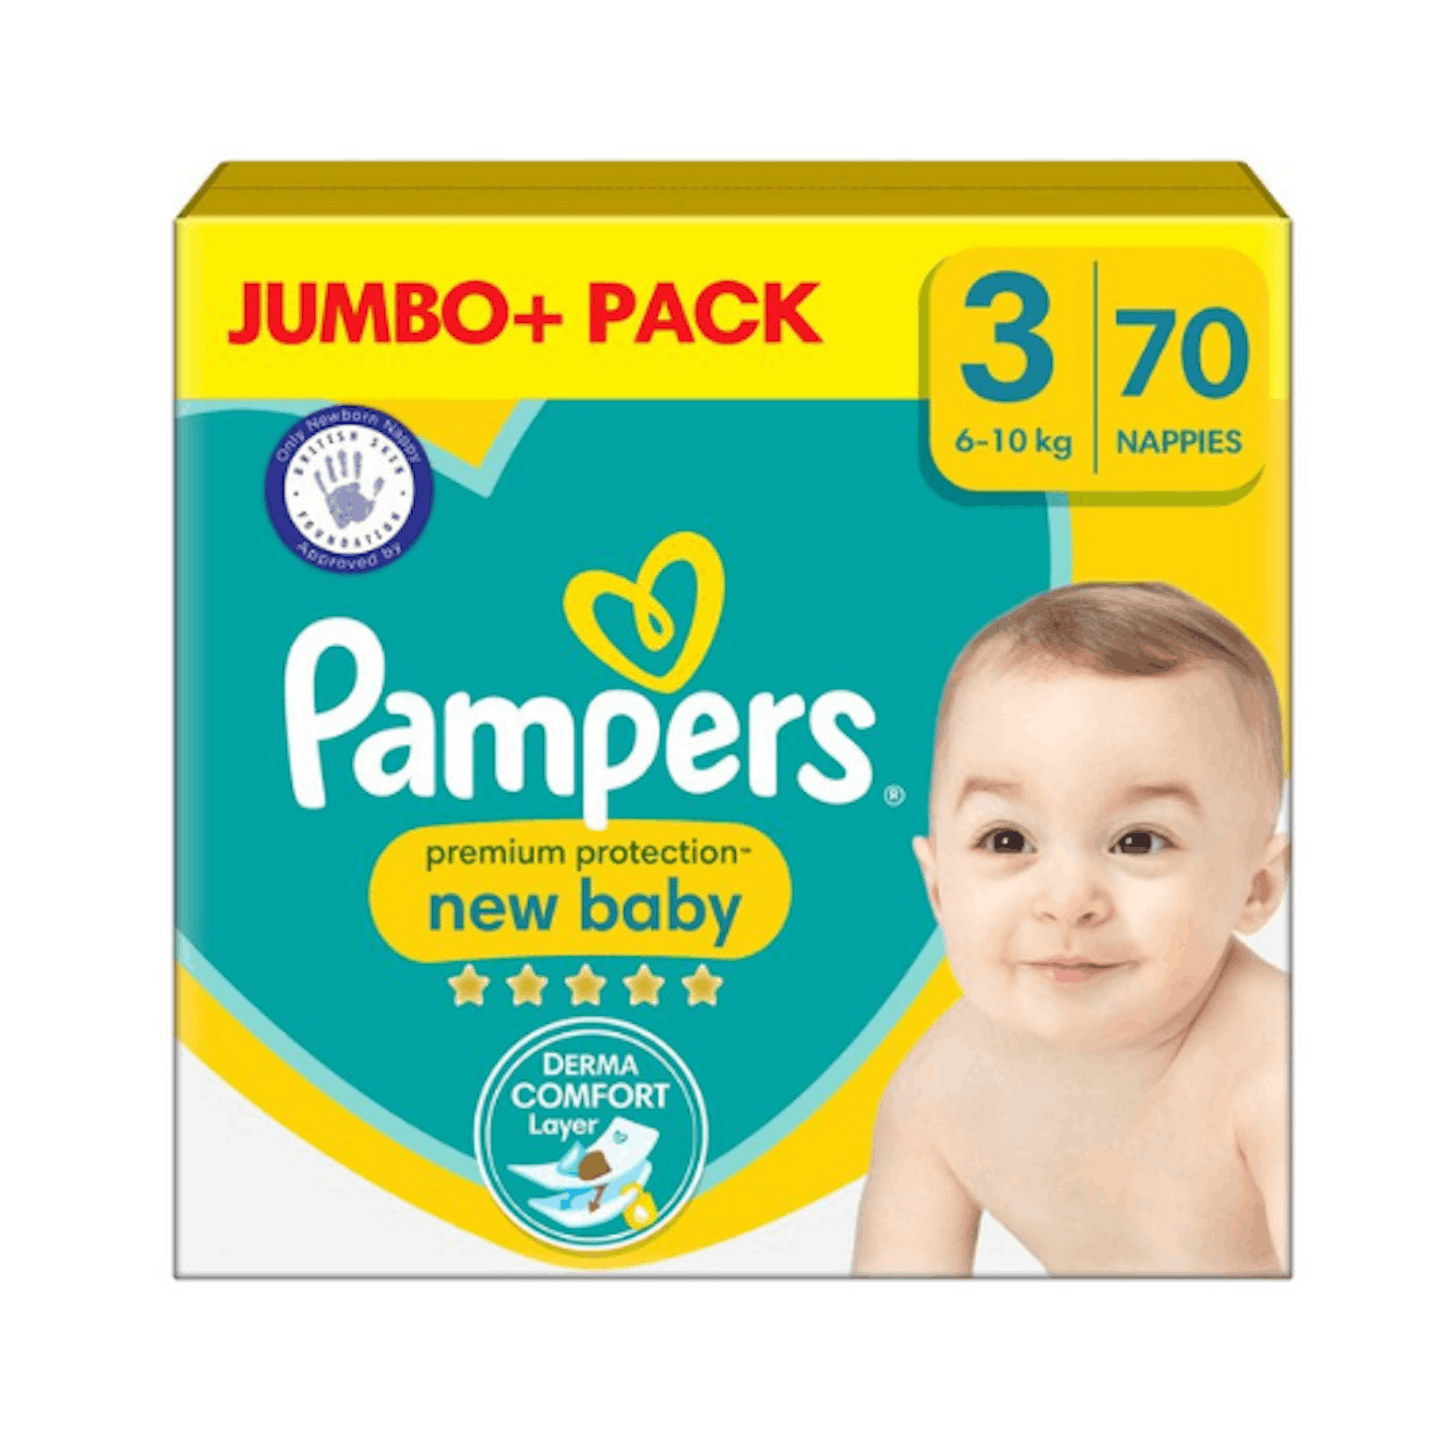 Nappy deals Pampers new baby